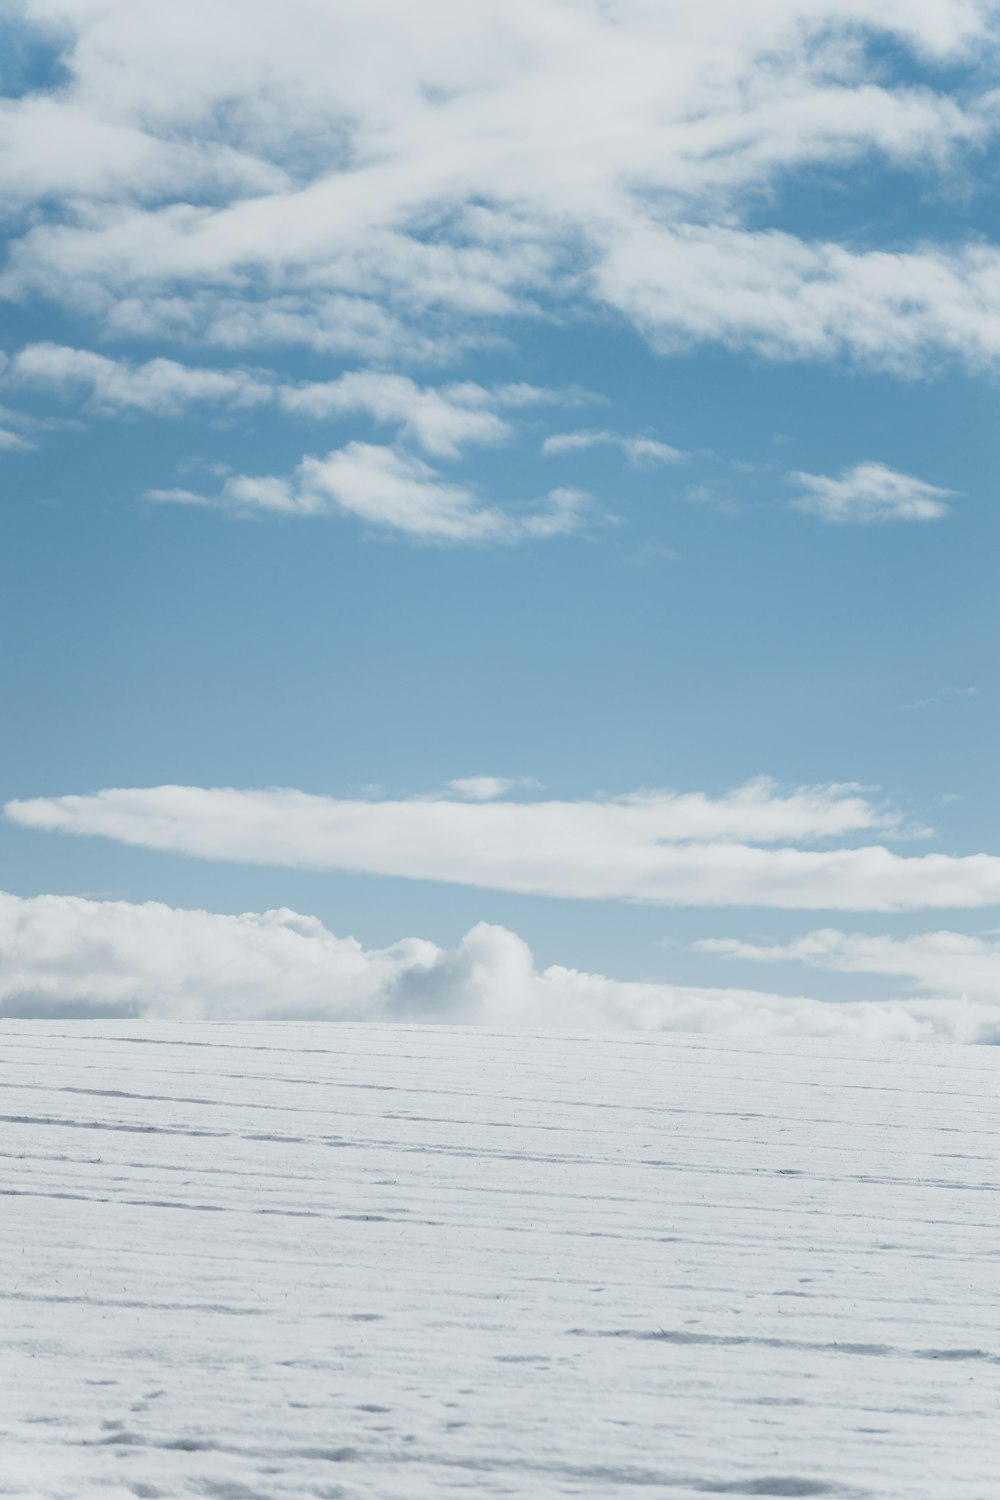 a person walking across a snow covered field